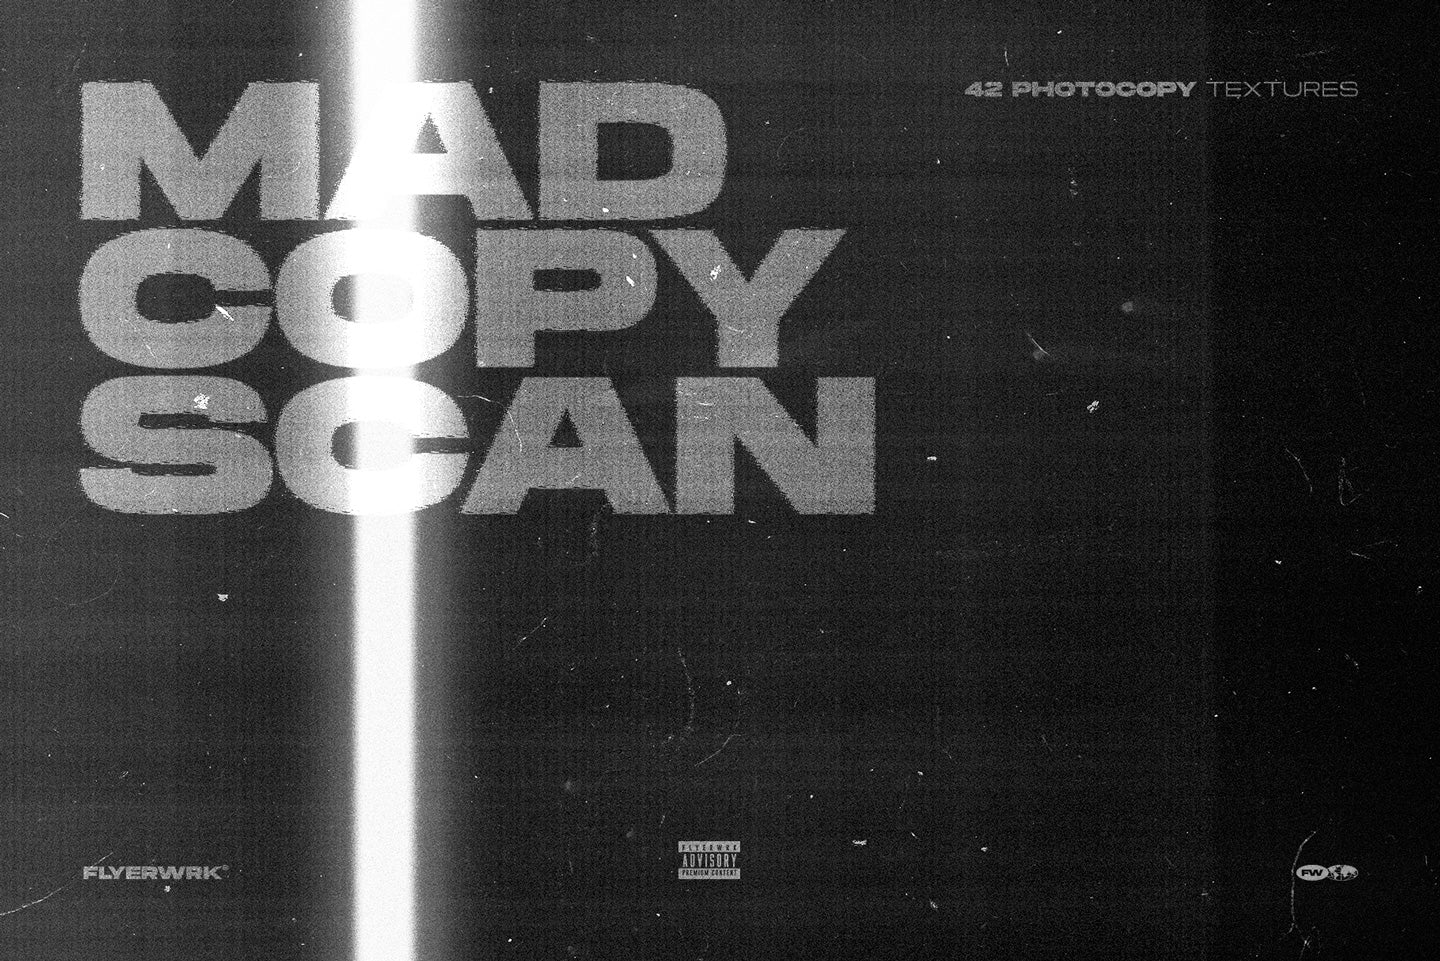 Mad Copy Scan